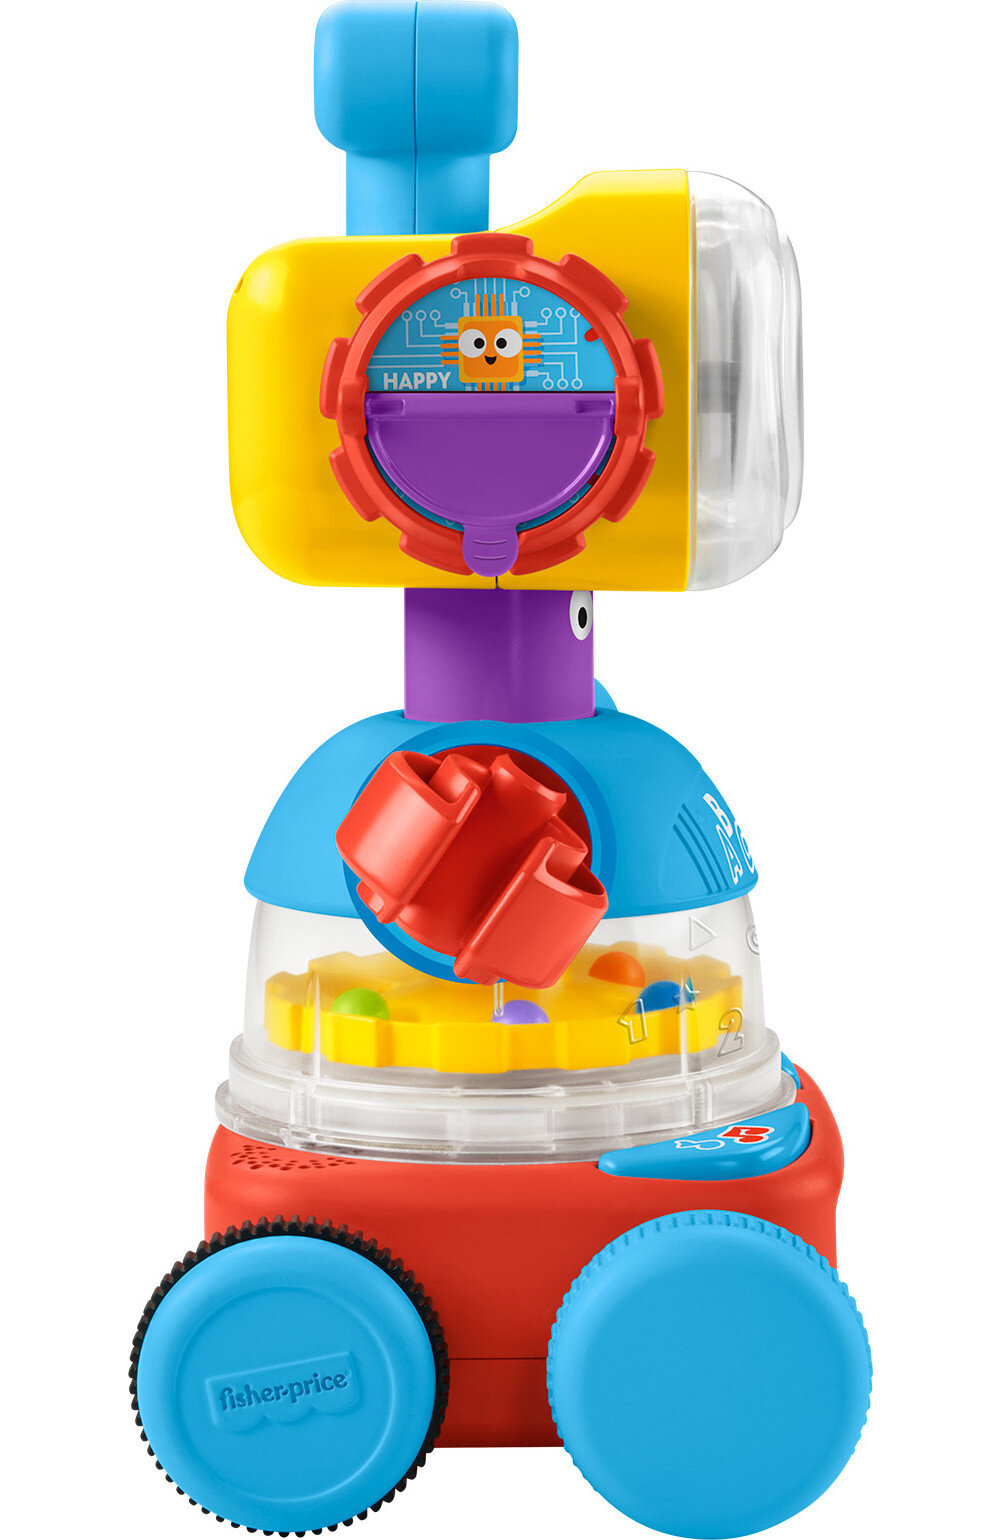 Fisher-Price 4-in-1 Learning Bot Interactive Toy Robot for Infants Toddlers and Preschool Kids - image 8 of 8